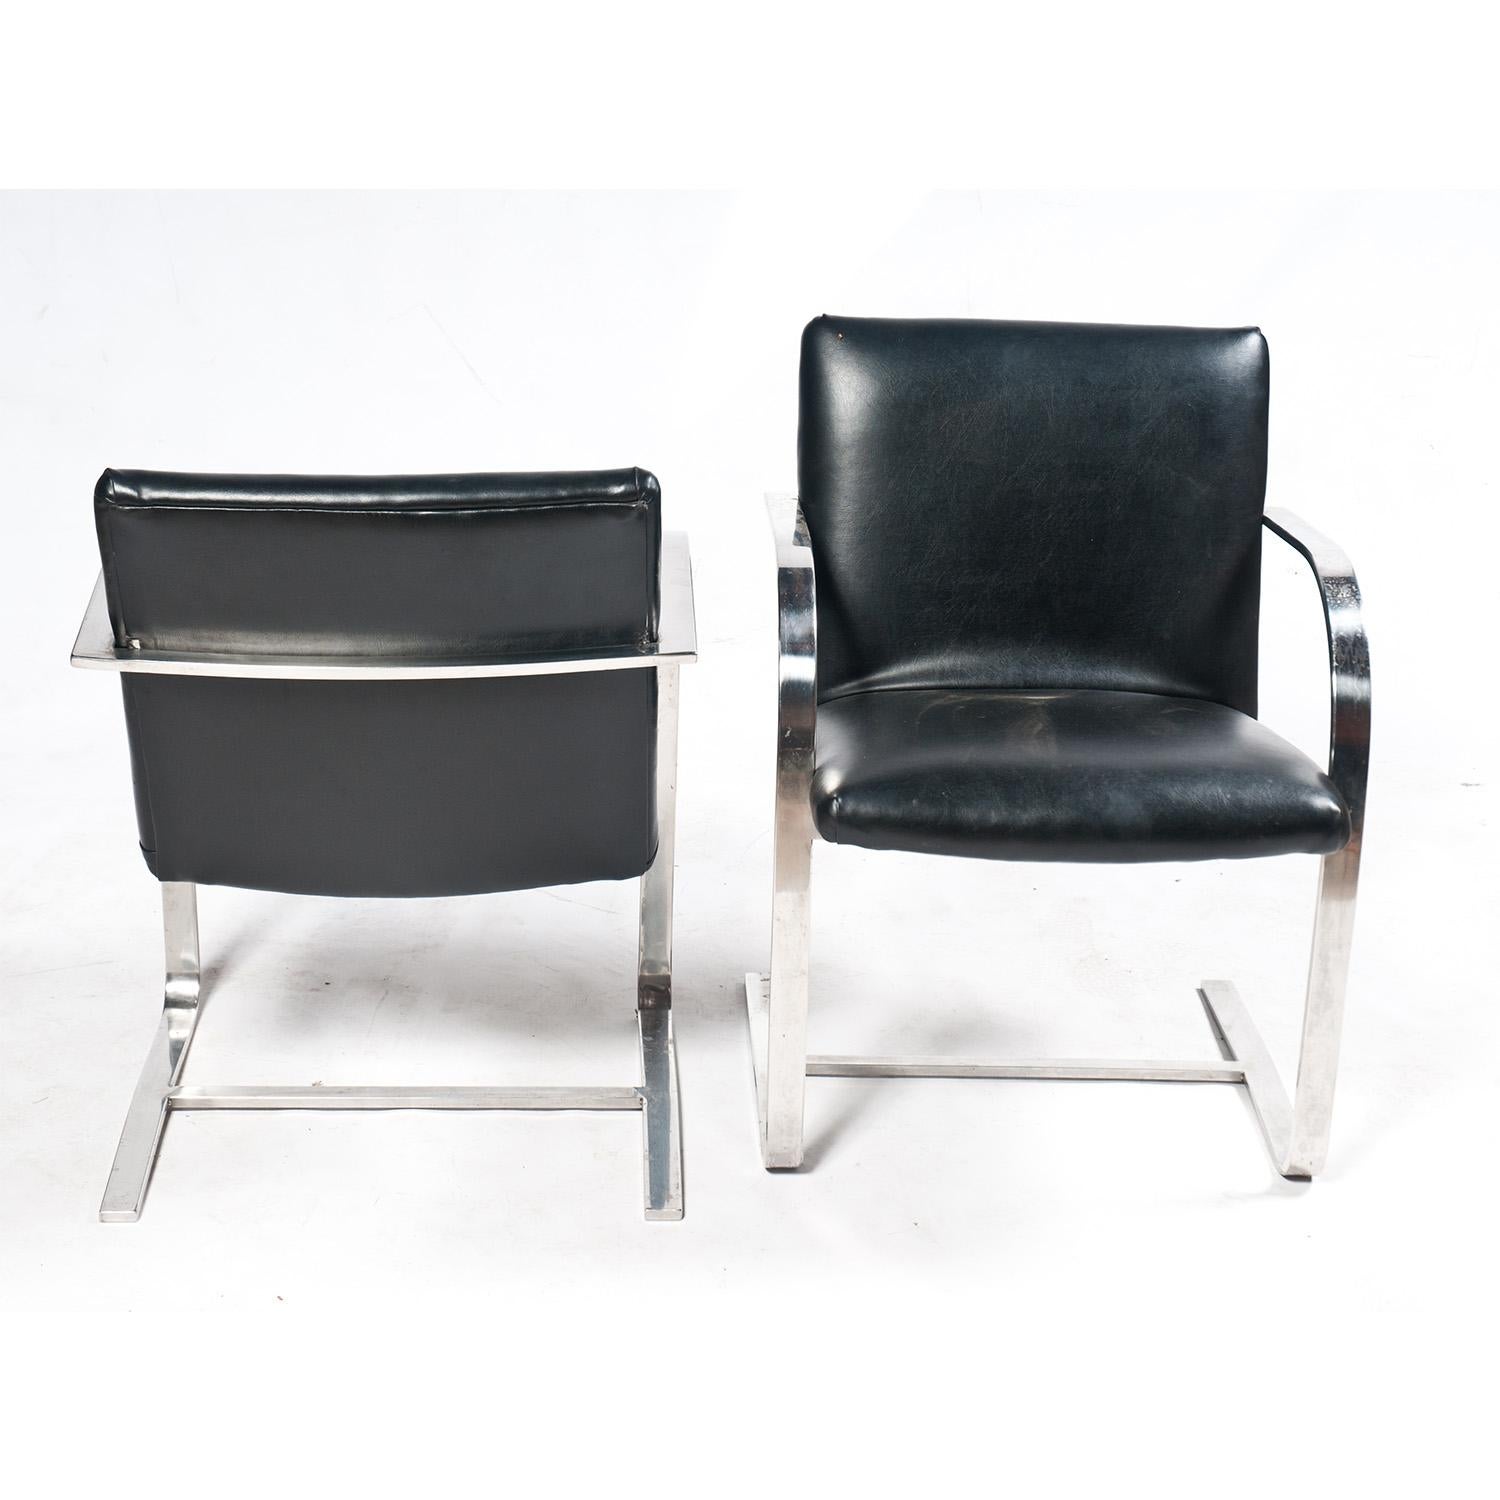 Set of four vintage Lugwig Mies van der Rohe Brno Chairs in black with mirror polished chair frame.

Created by Mies van der Rohe, icon of modernist architecture and design. The Brno chairs are ultra comfortable, and they invite the sitter to